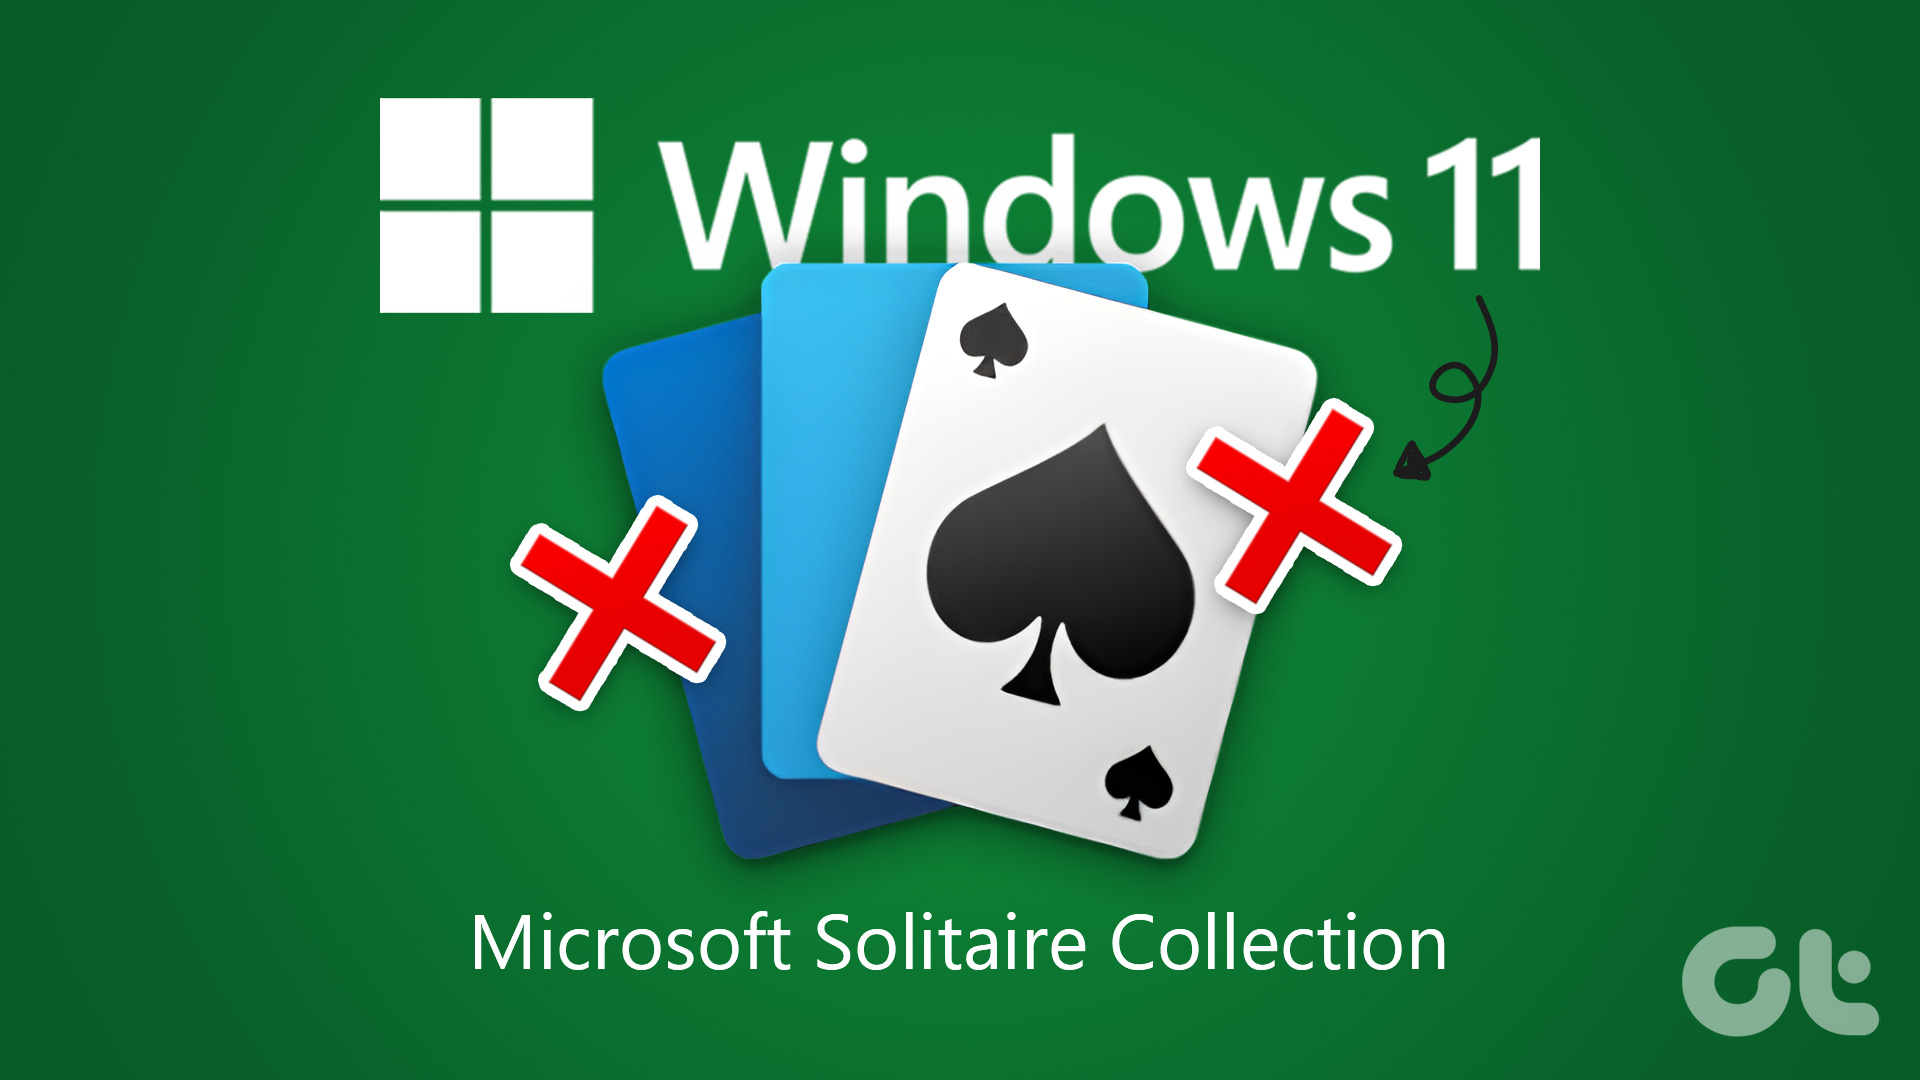 Microsoft Solitaire and Casual Games Not Loading, How to Fix